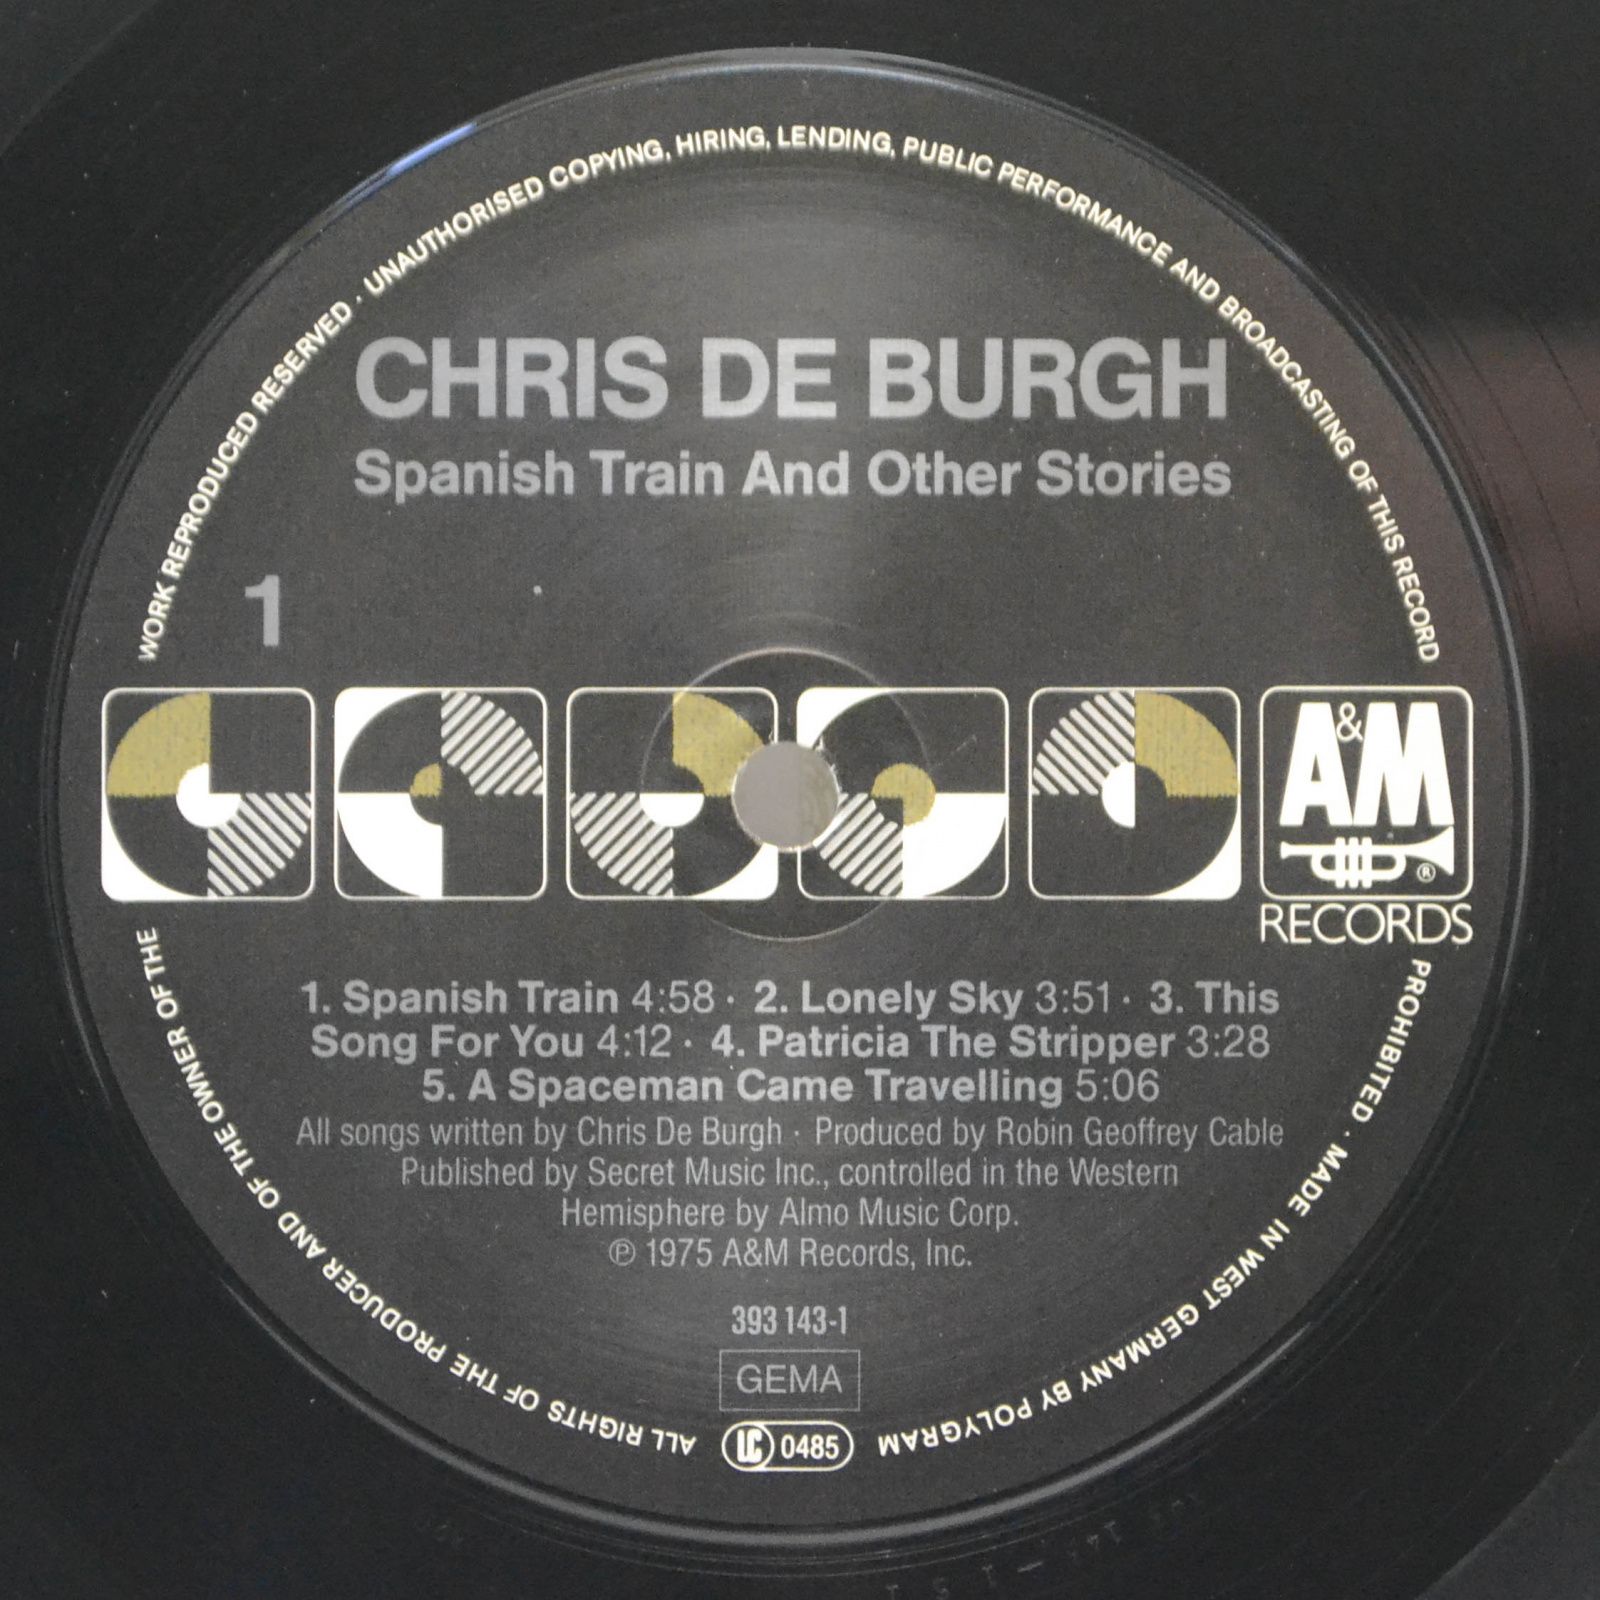 Chris de Burgh — Spanish Train And Other Stories, 1985